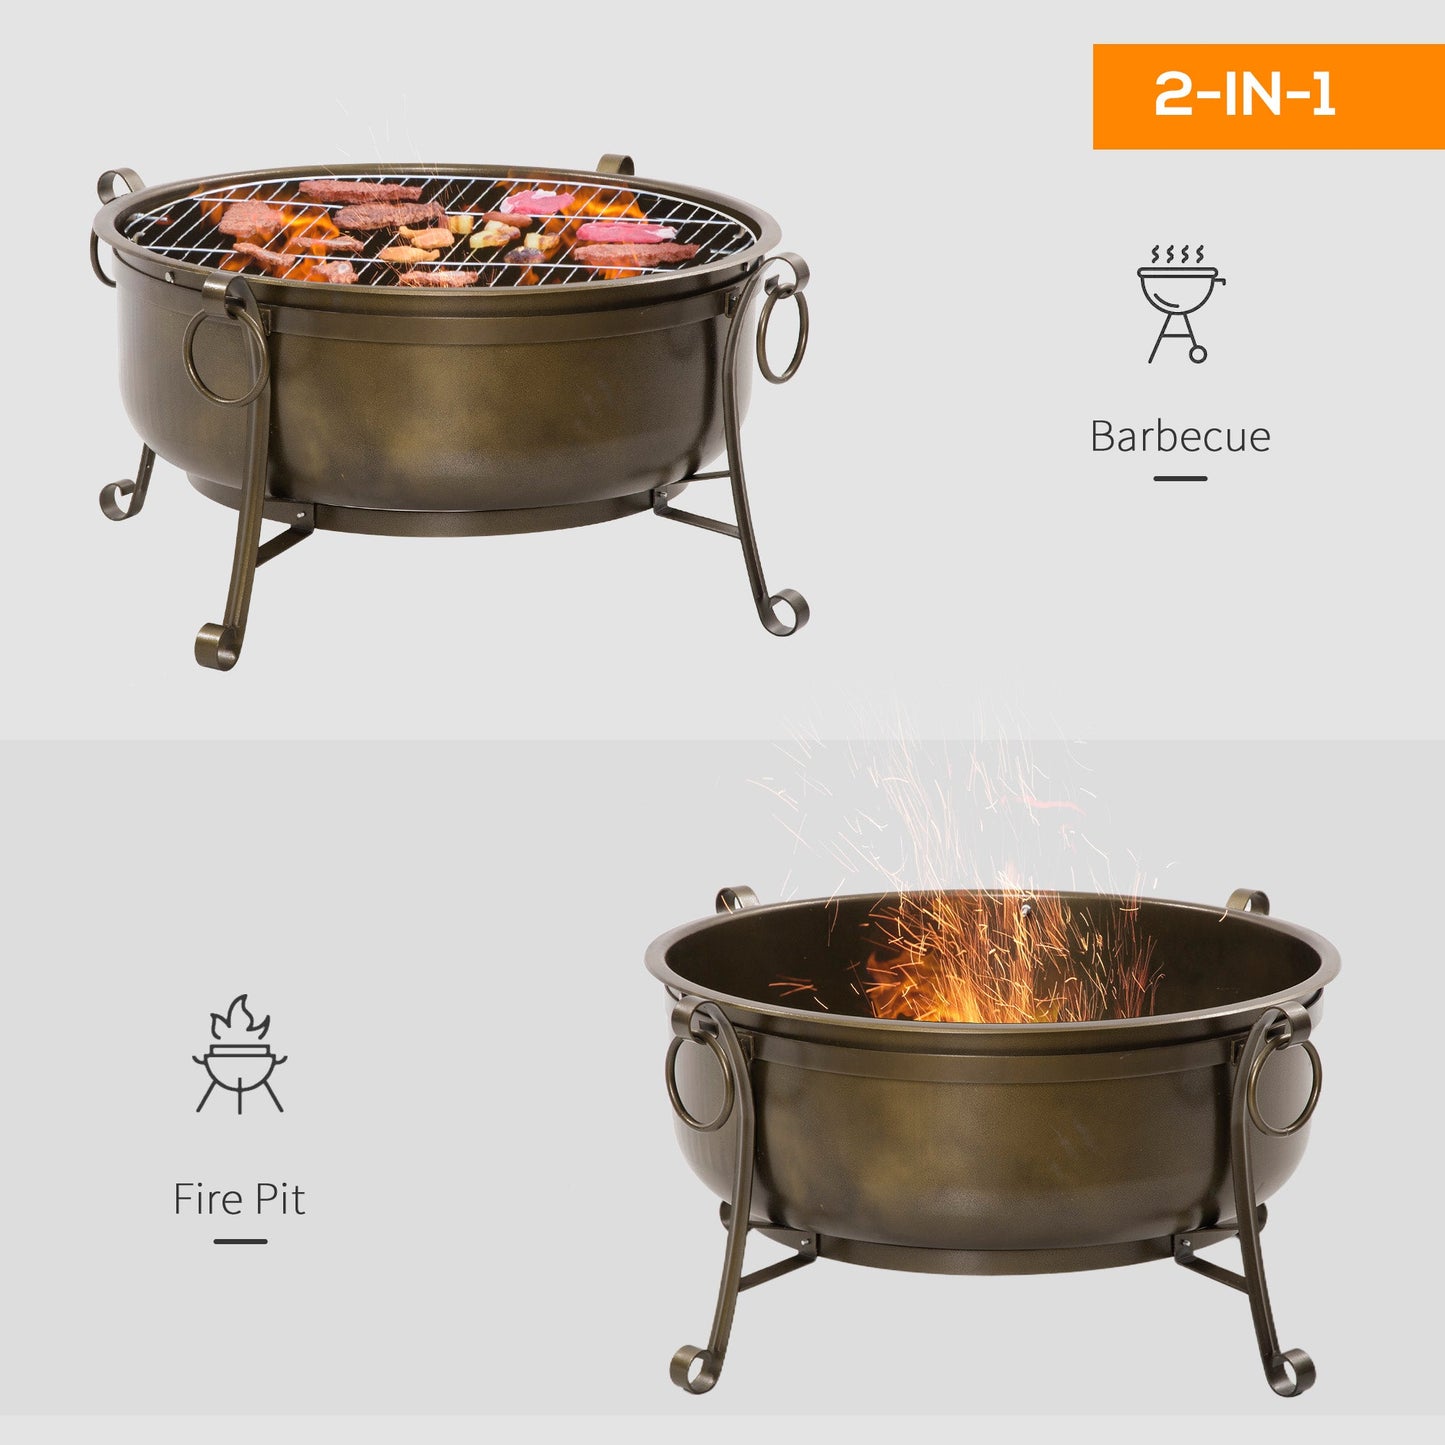 Outdoor and Garden-37 Inch Outdoor Fire Pit Bowl with Spark Screen, Patio Heater Log Wood Charcoal Burner, Log Poker, and Wood Grate - Outdoor Style Company